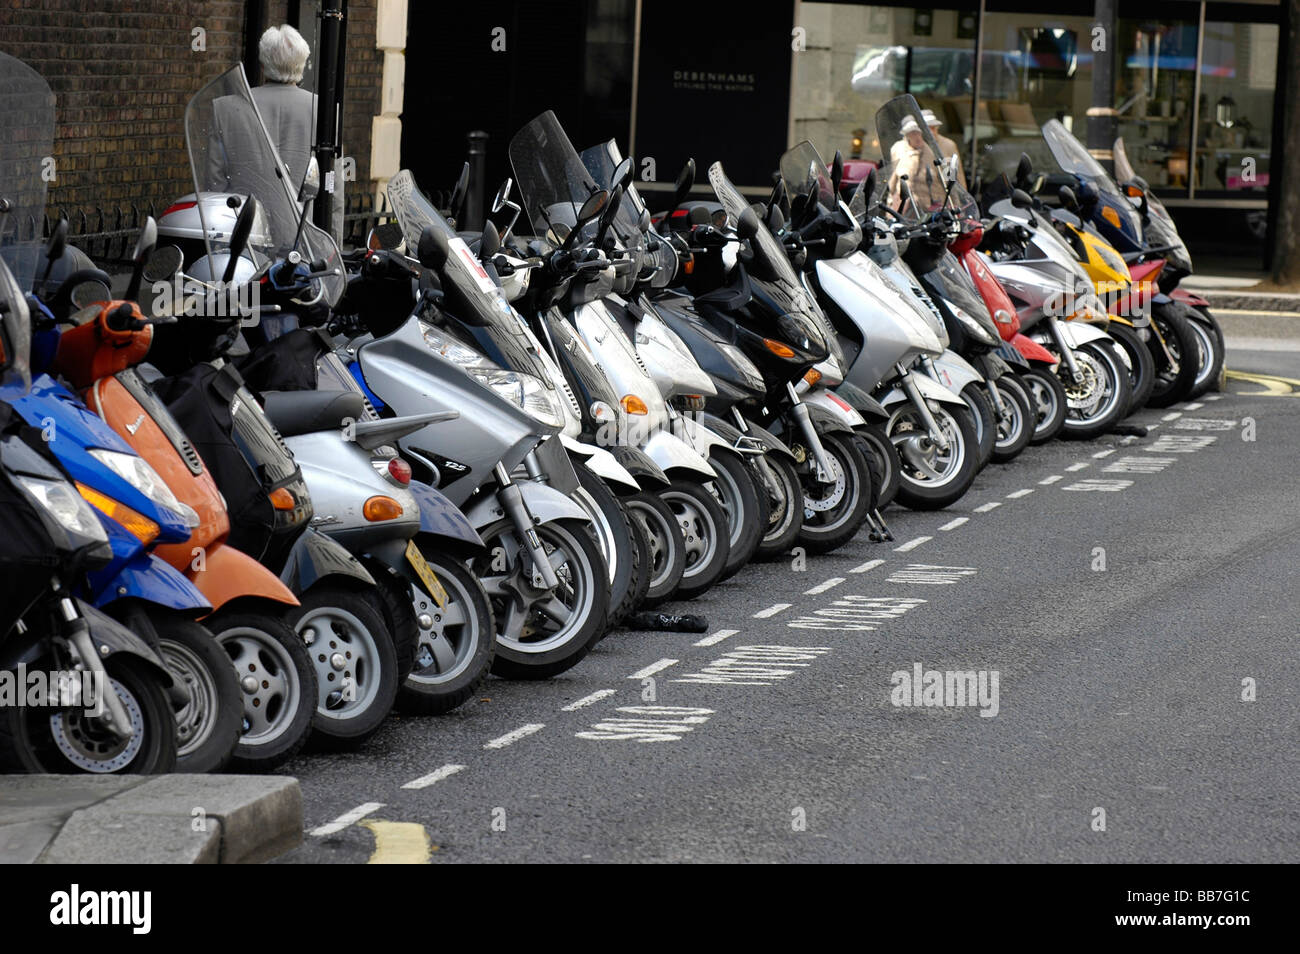 A motorbike and scooter parking bay in central London 2 Stock Photo - Alamy